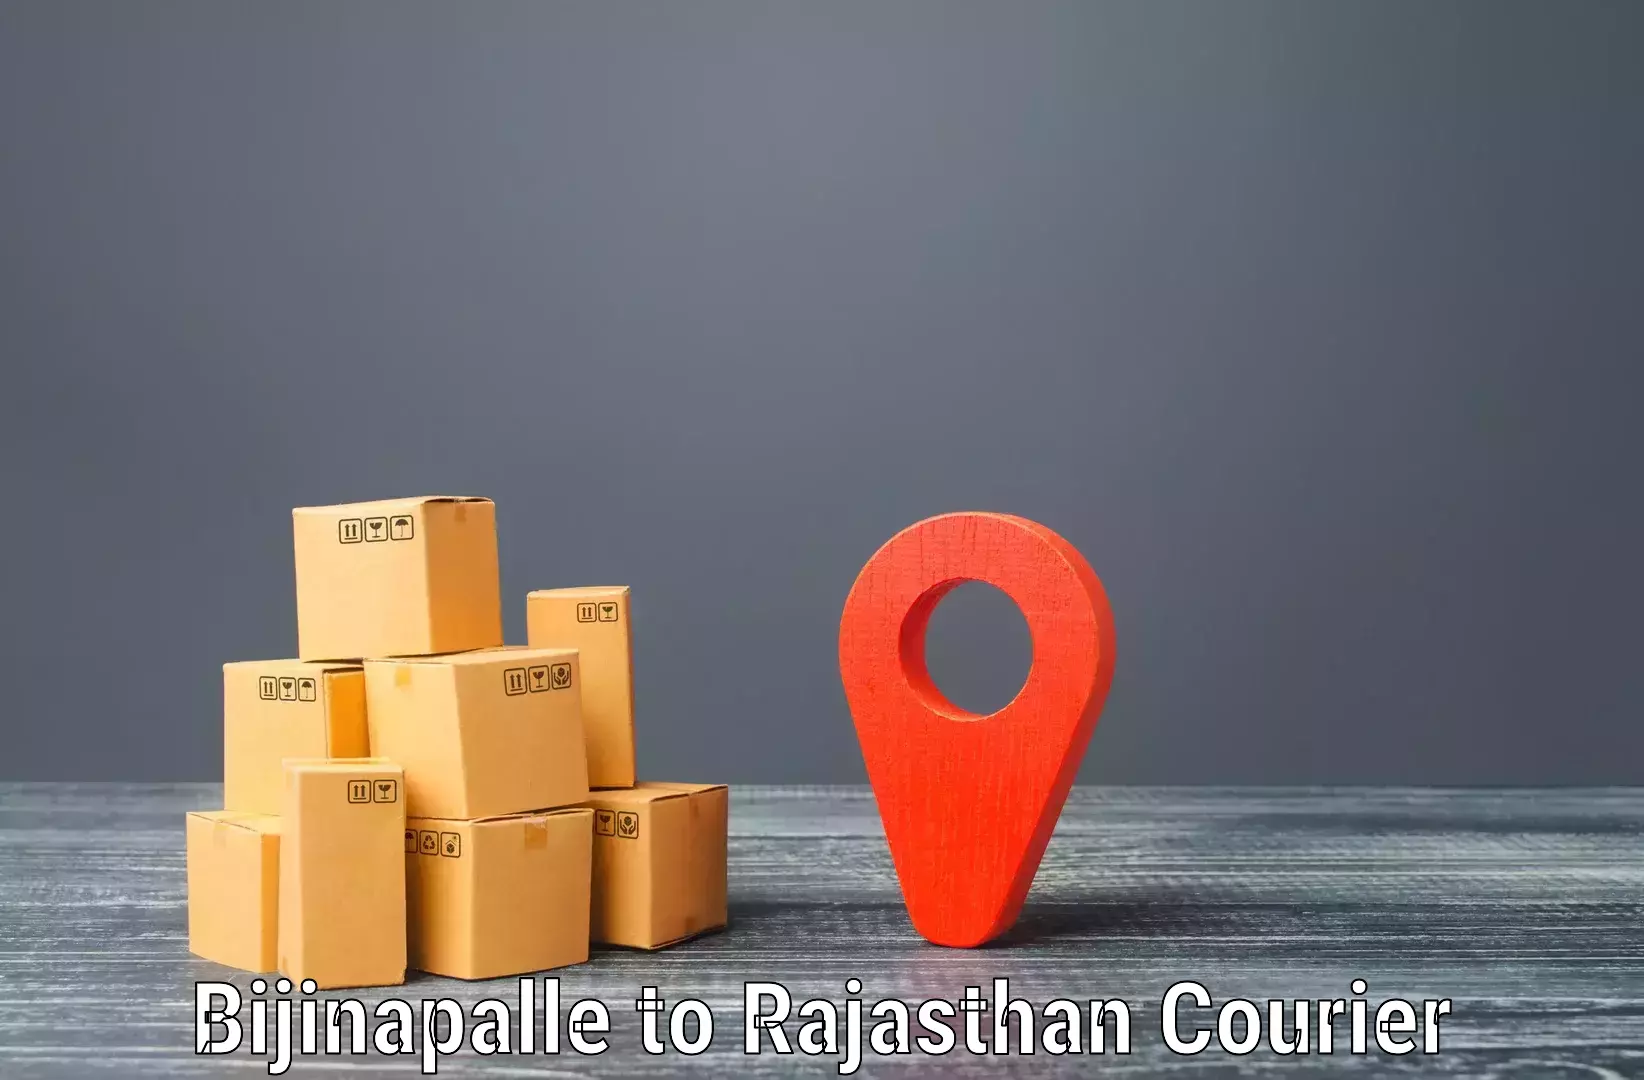 Express delivery network Bijinapalle to Mathania